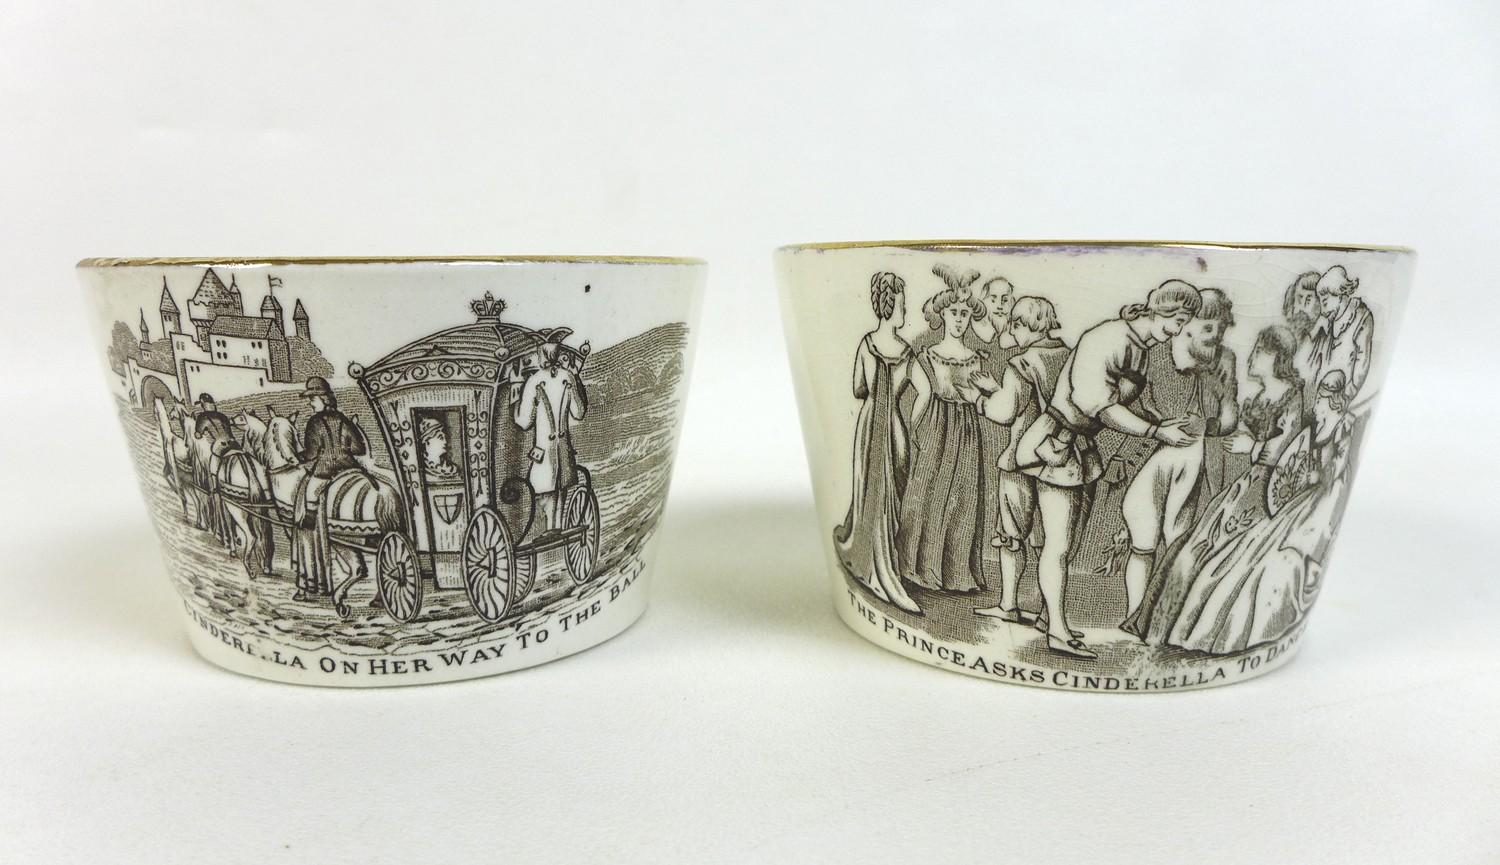 An unusual Victorian ceramic child's tea set, the whole decorated with scenes from Cinderella, - Image 5 of 18